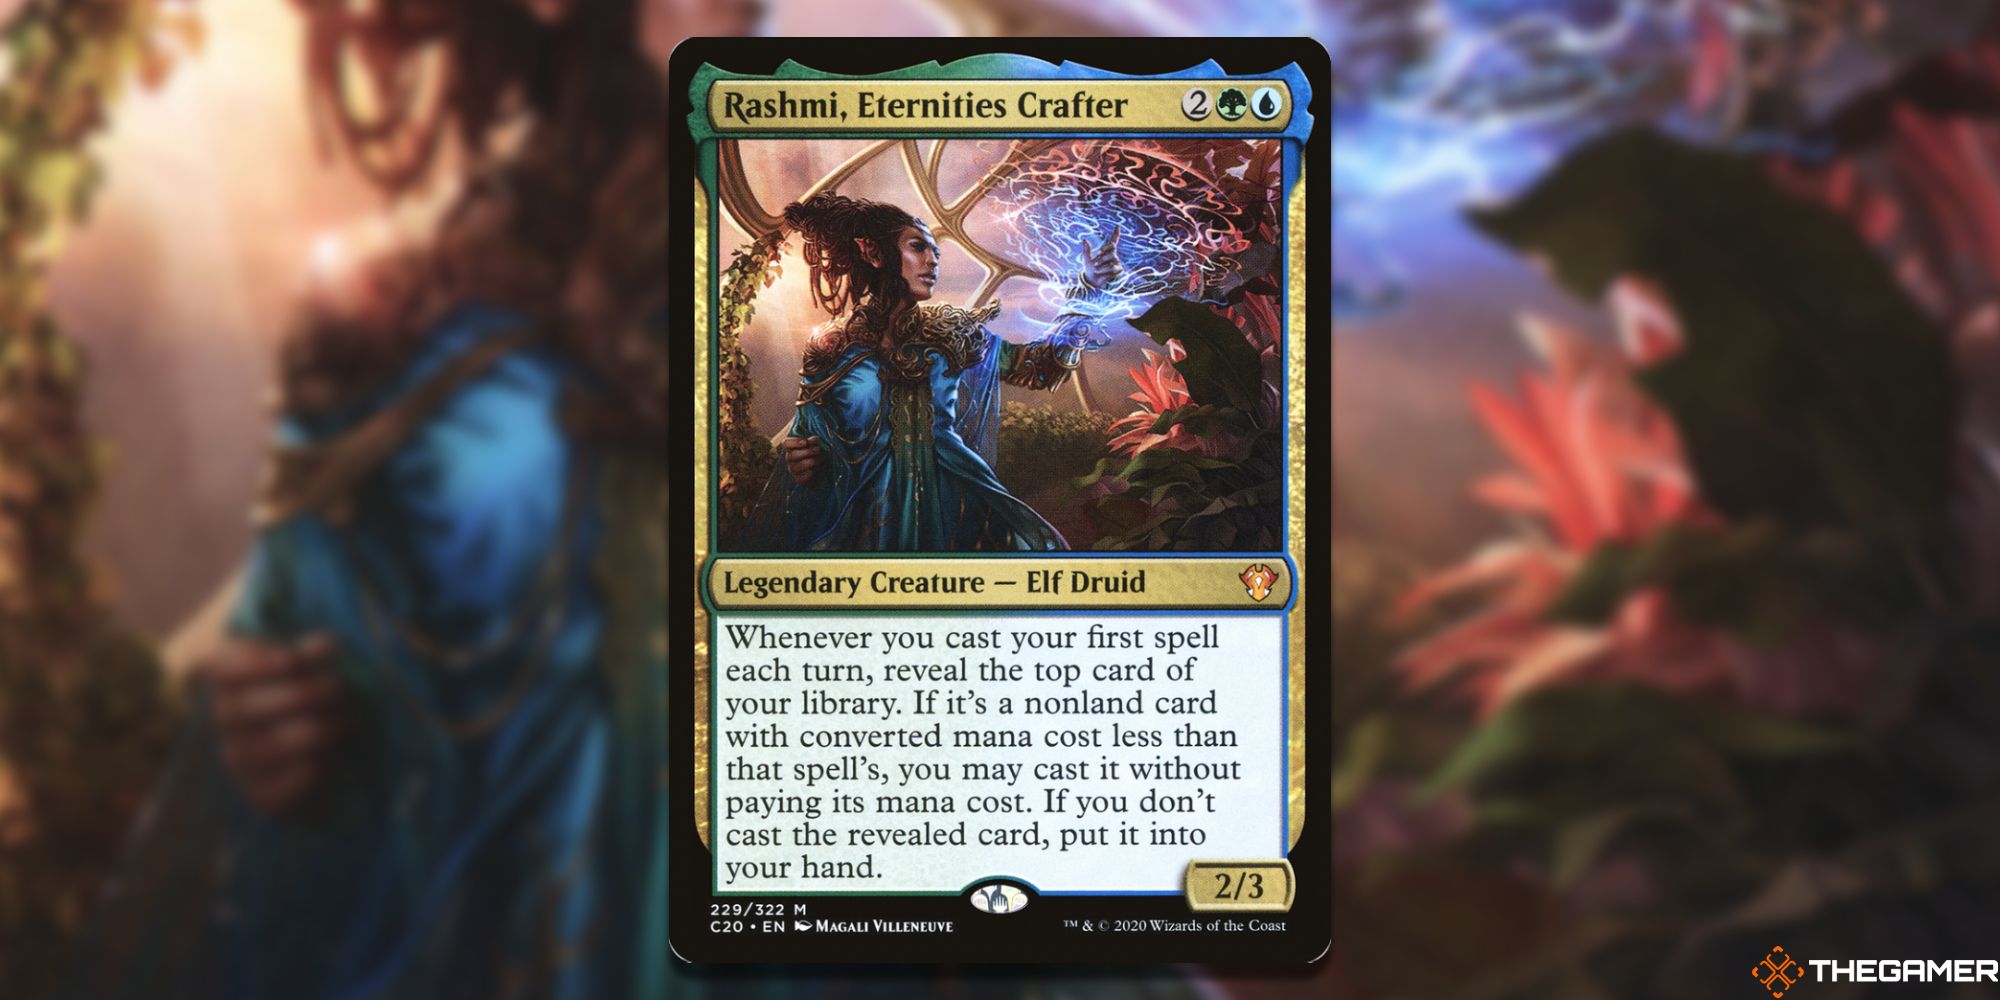 Image of the Rashmi, Eternities Crafter card in Magic: The Gathering, with art by Magali Villeneuve